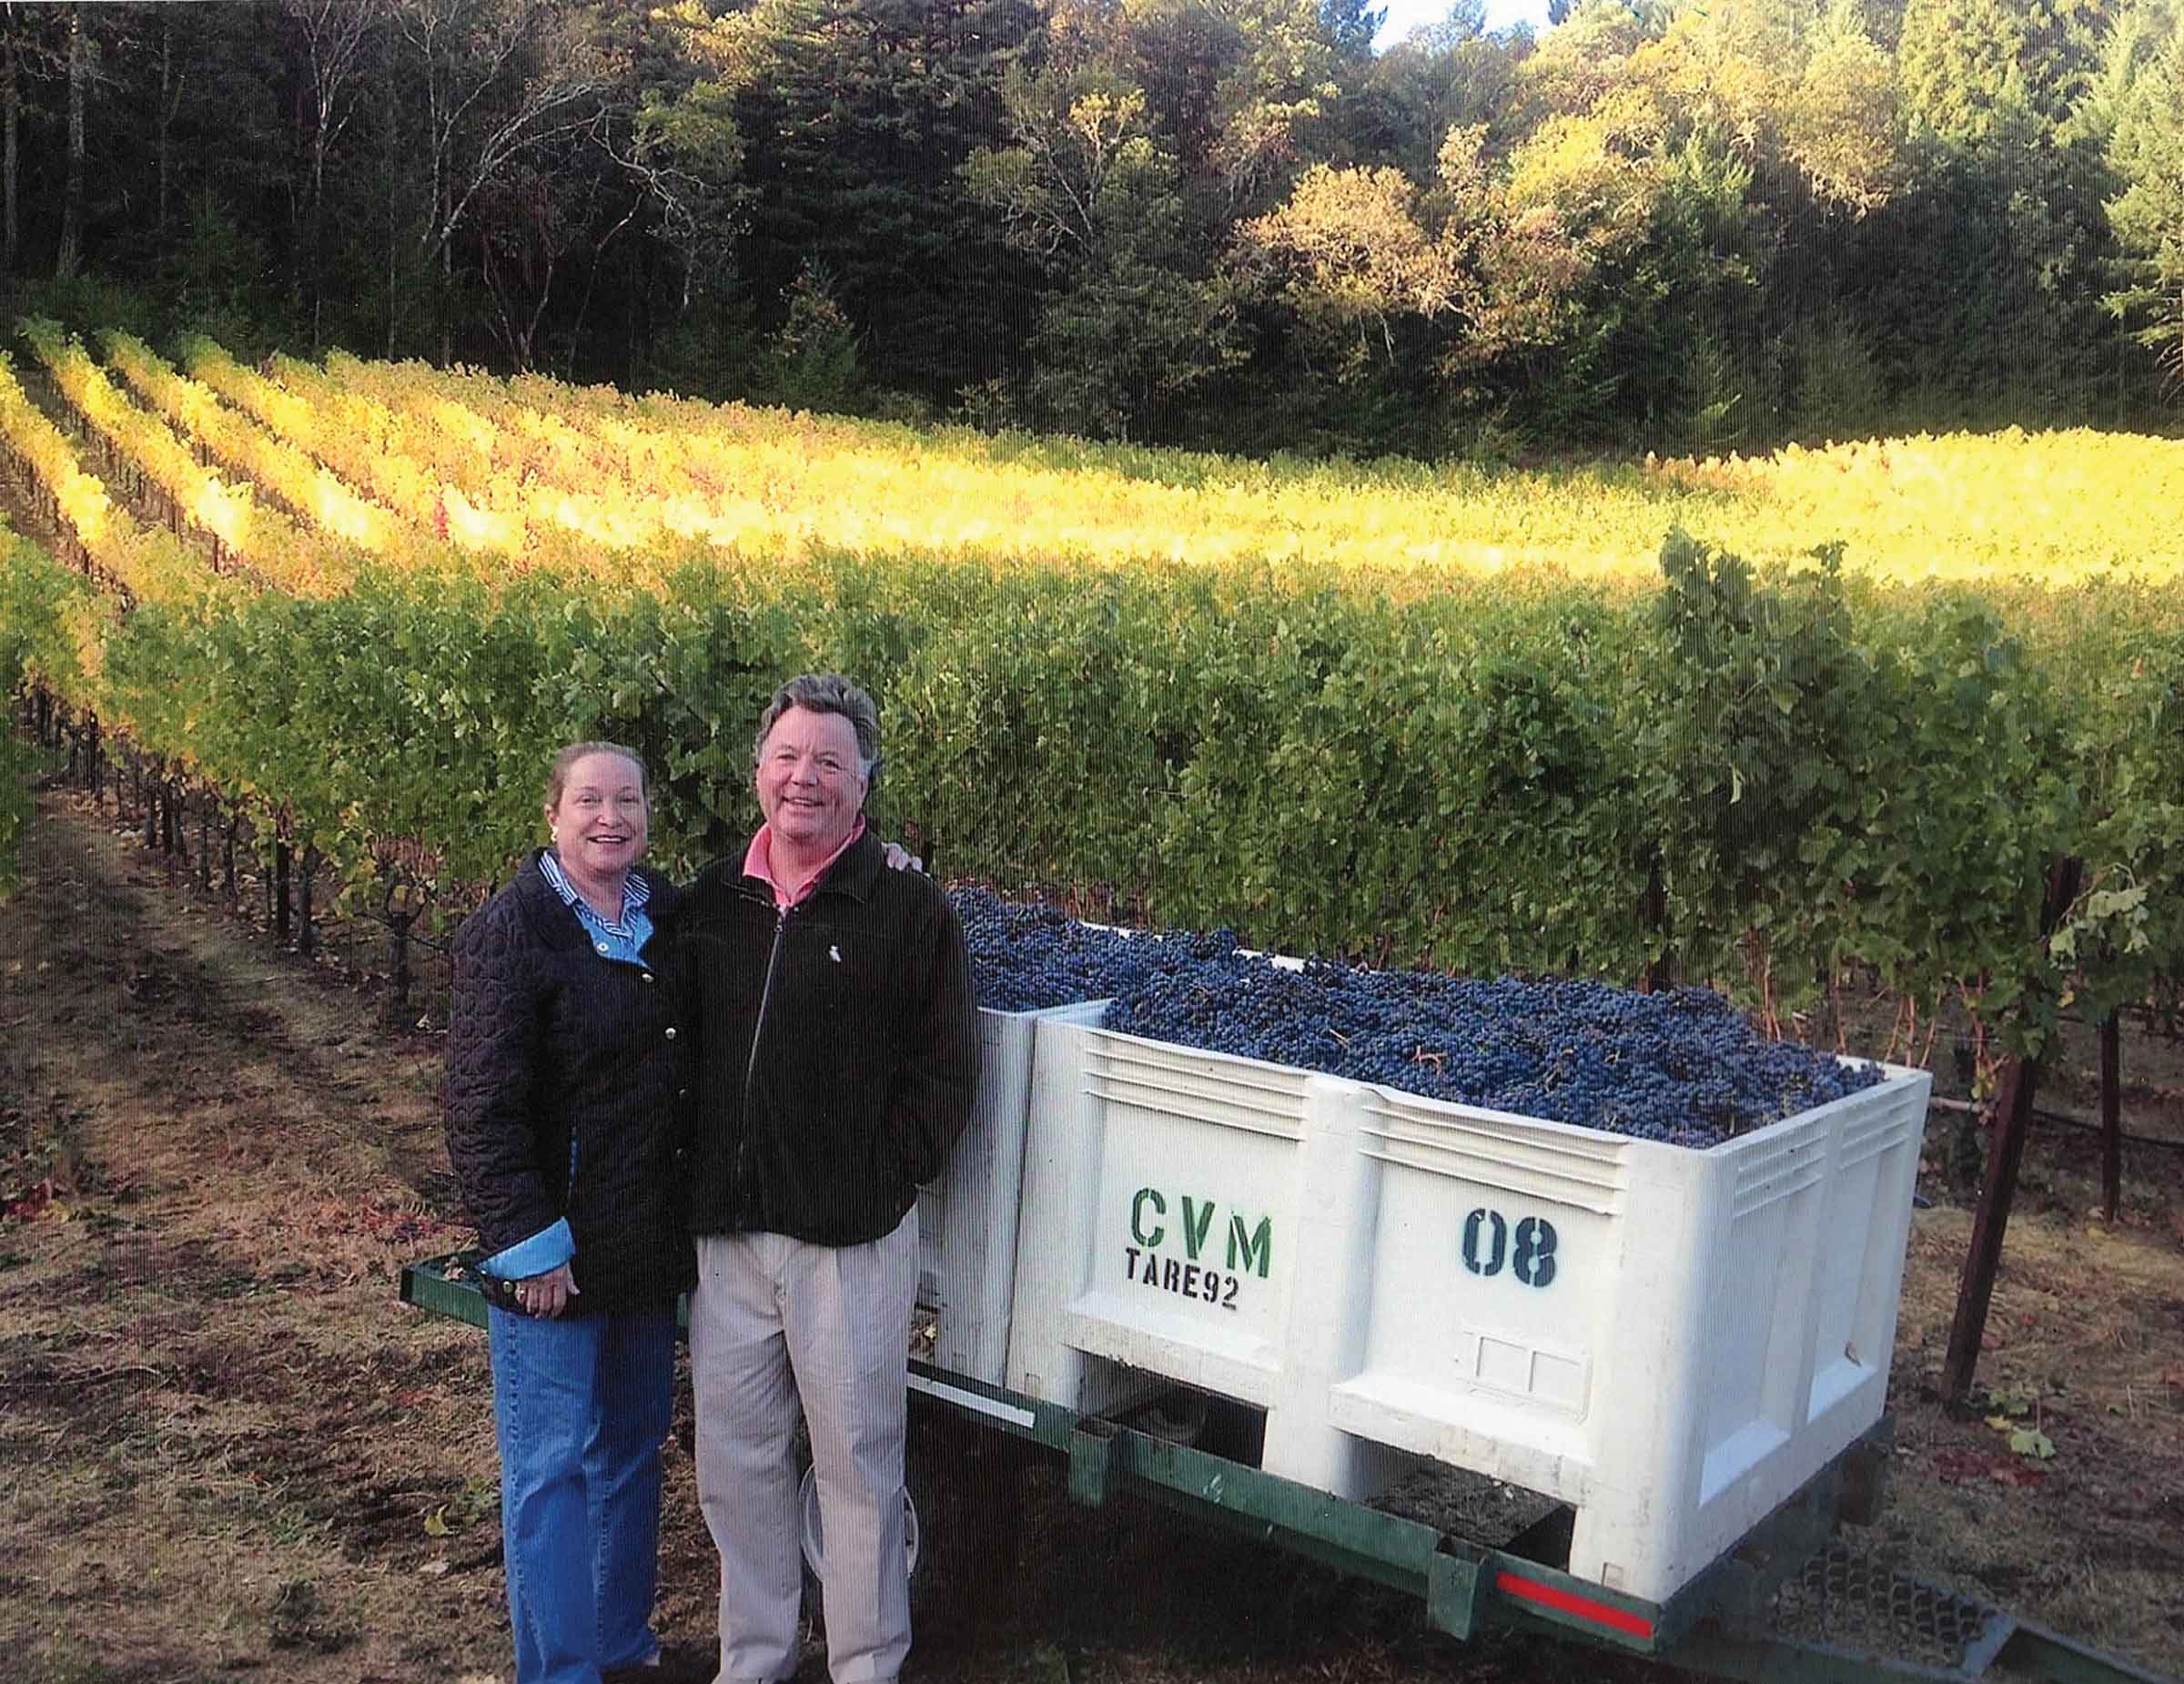 Marilyn and Edward Wallis standing in front of bins in the vineyard